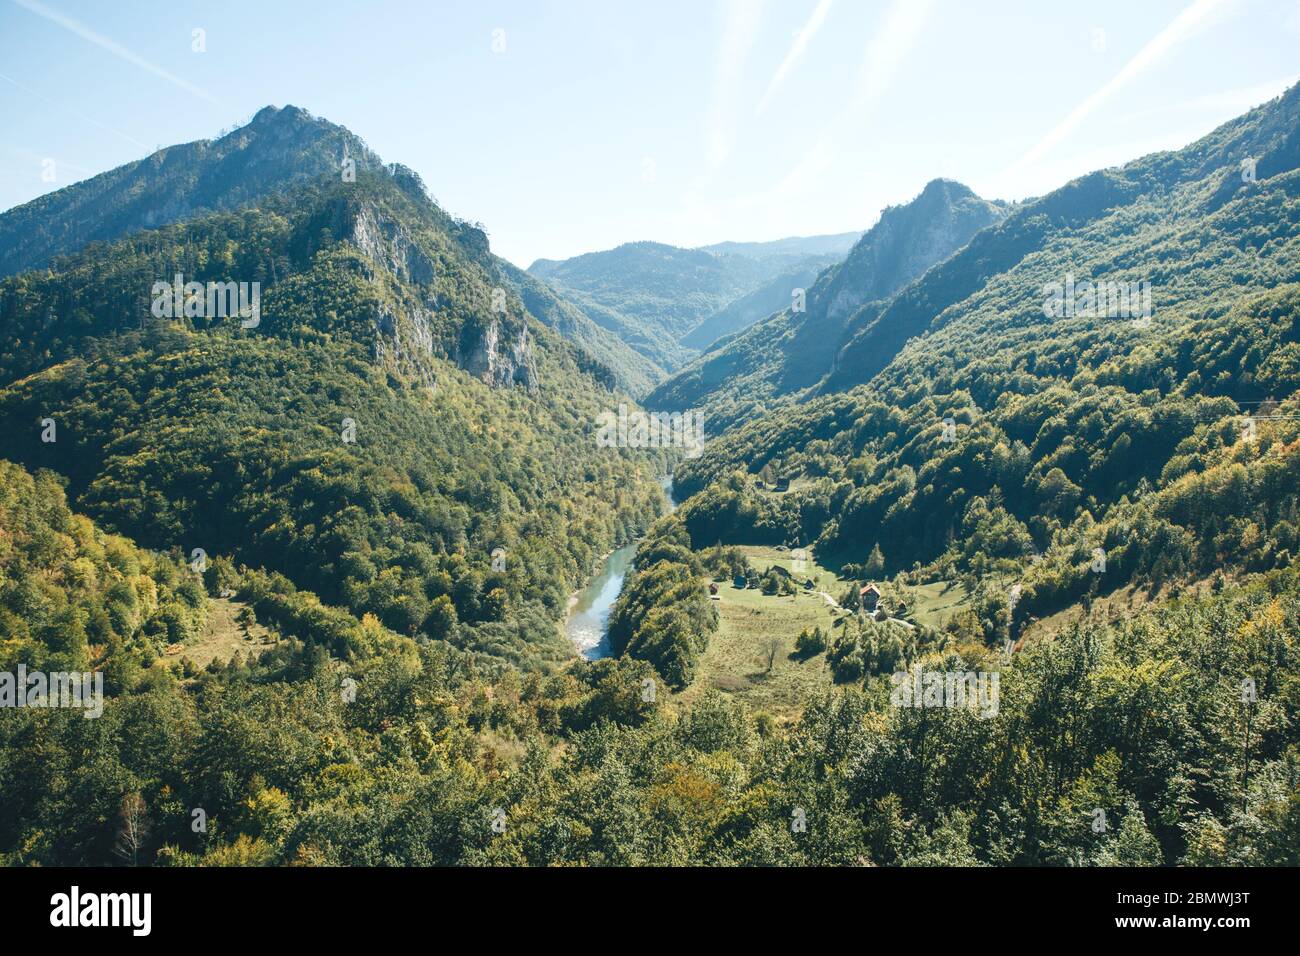 Beautiful view of the natural landscape in Montenegro. View of the mountains, forest and river in the canyon of the Tara River in northern Montenegro. Stock Photo